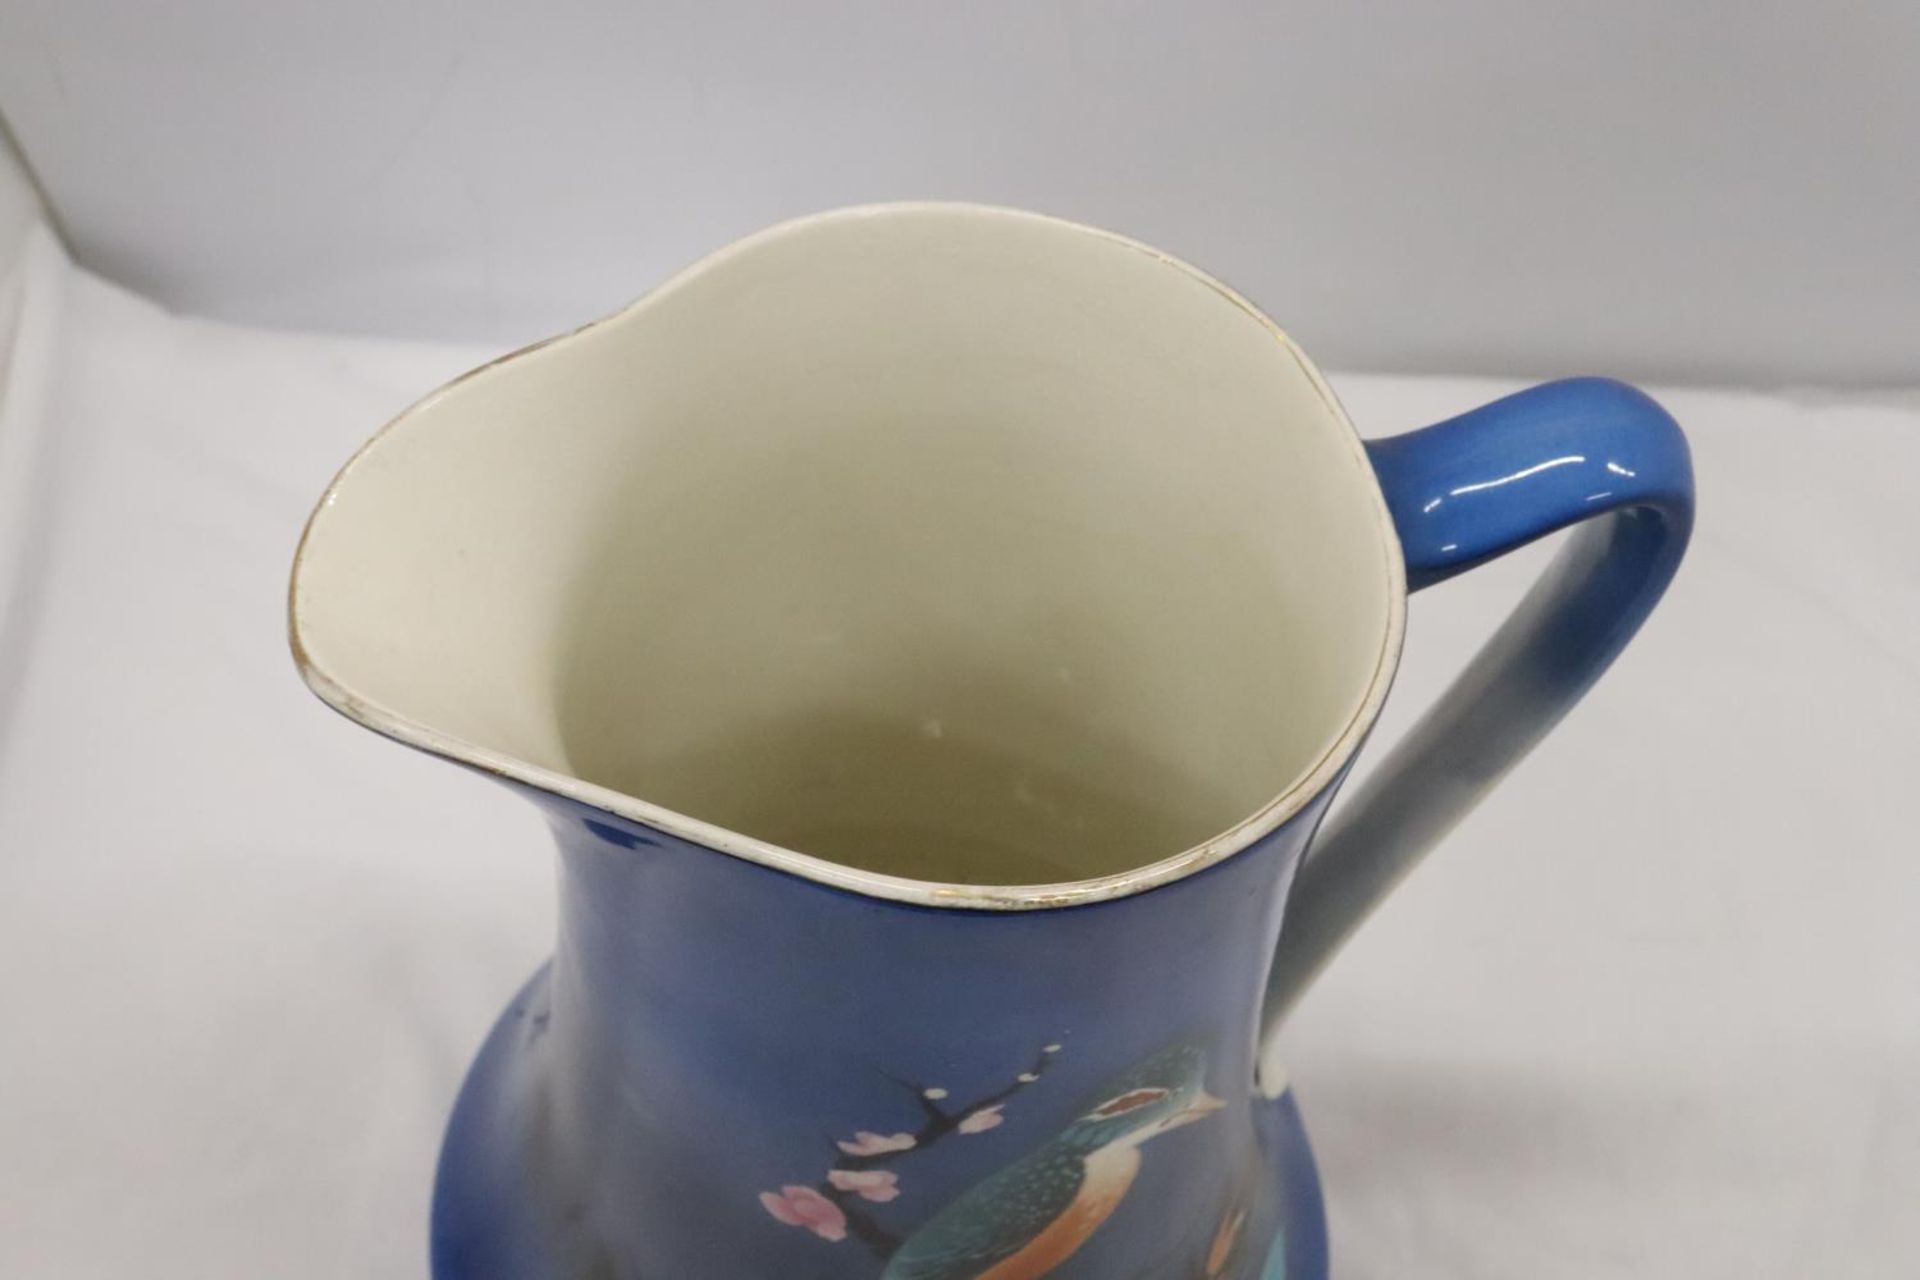 A LARGE ROYAL VENTON WARE (1930'S) JUG WITH KINGFISHER DESIGN - Image 5 of 6